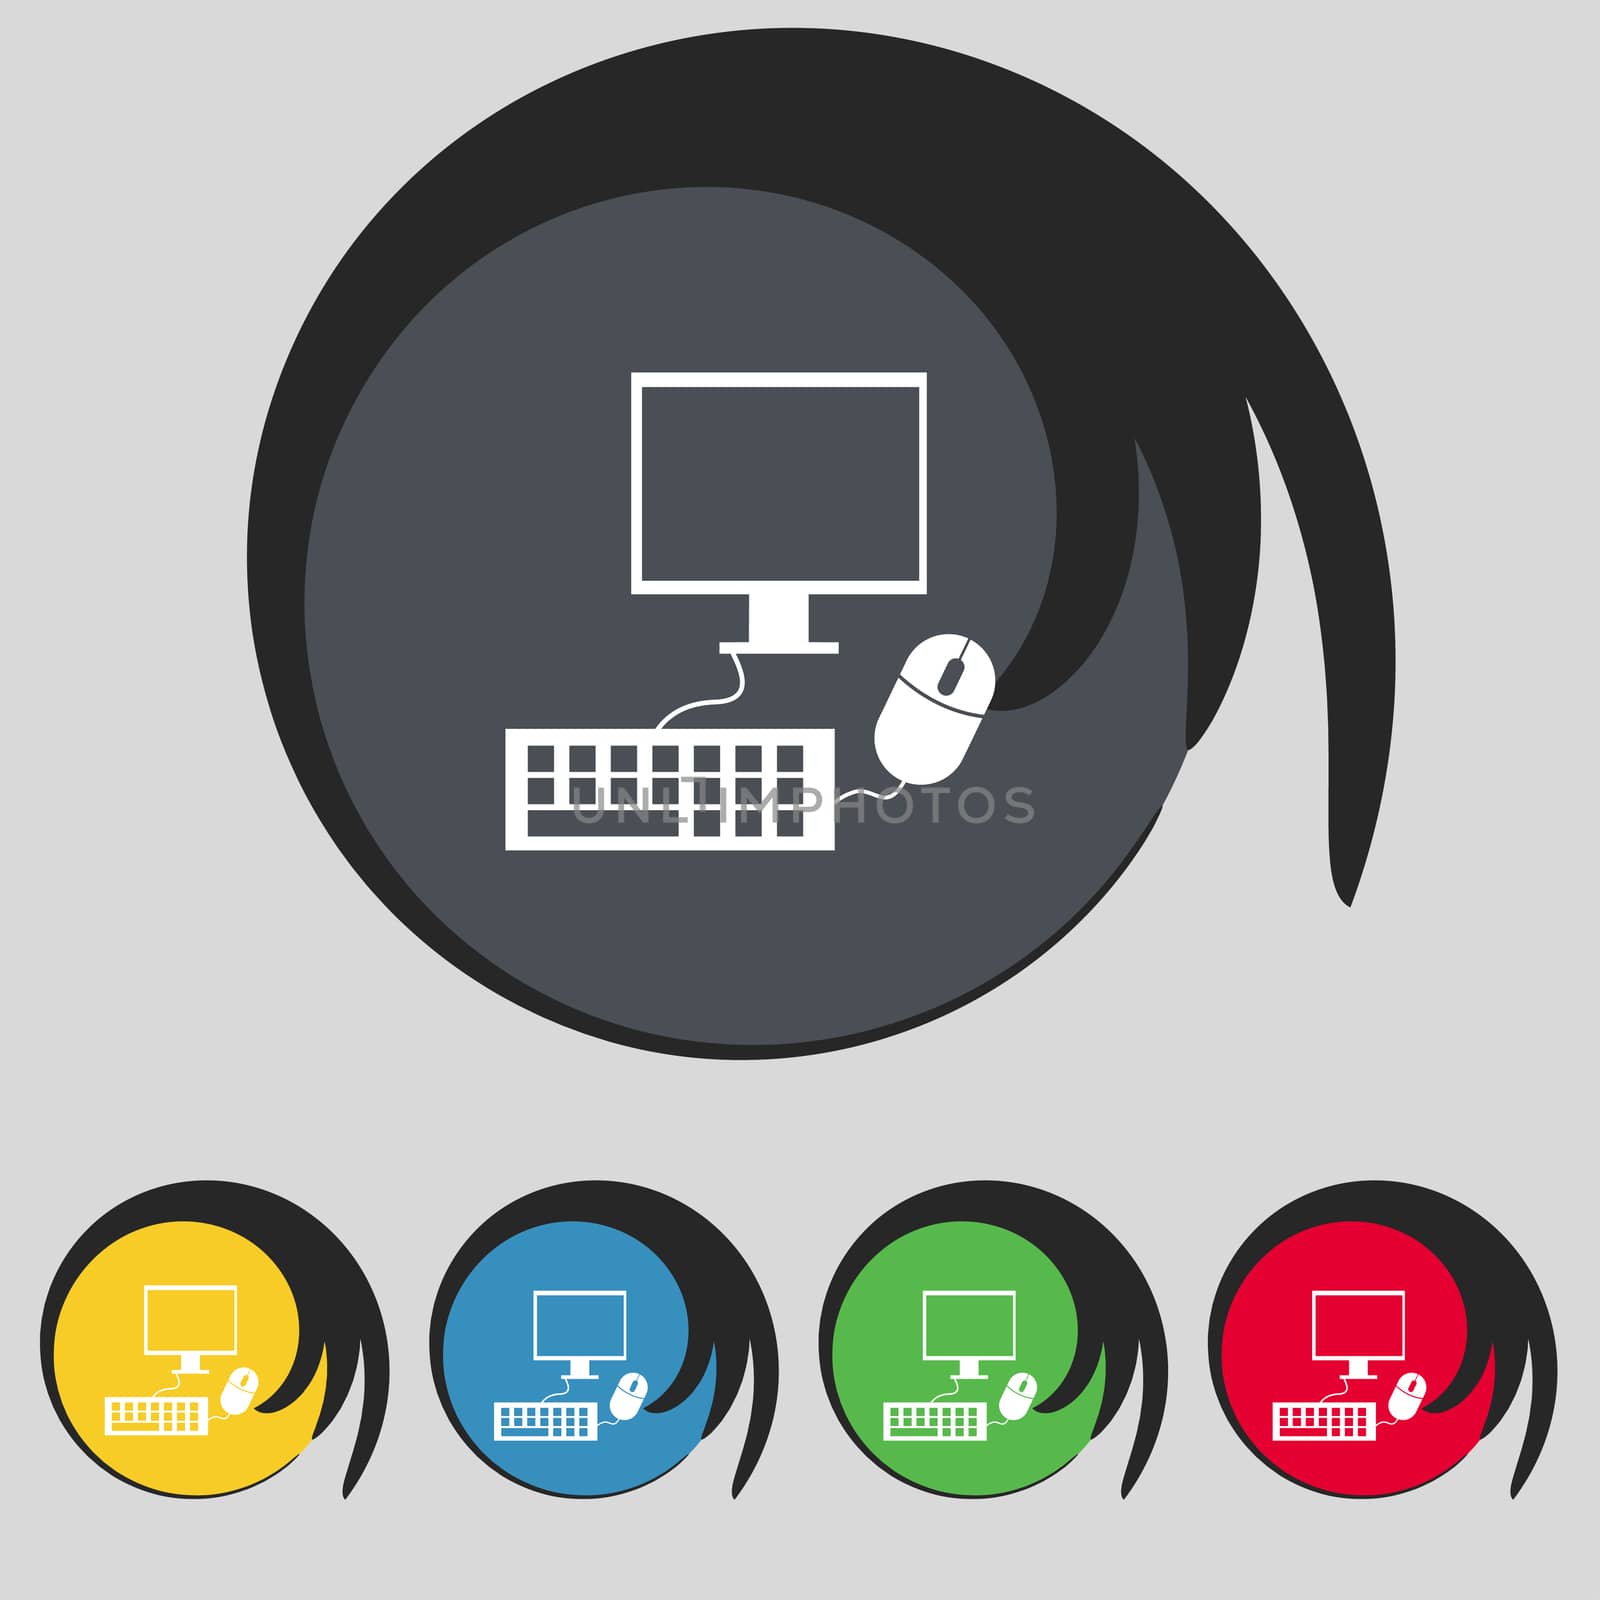 Computer widescreen monitor, keyboard, mouse sign icon. Set colourful buttons illustration